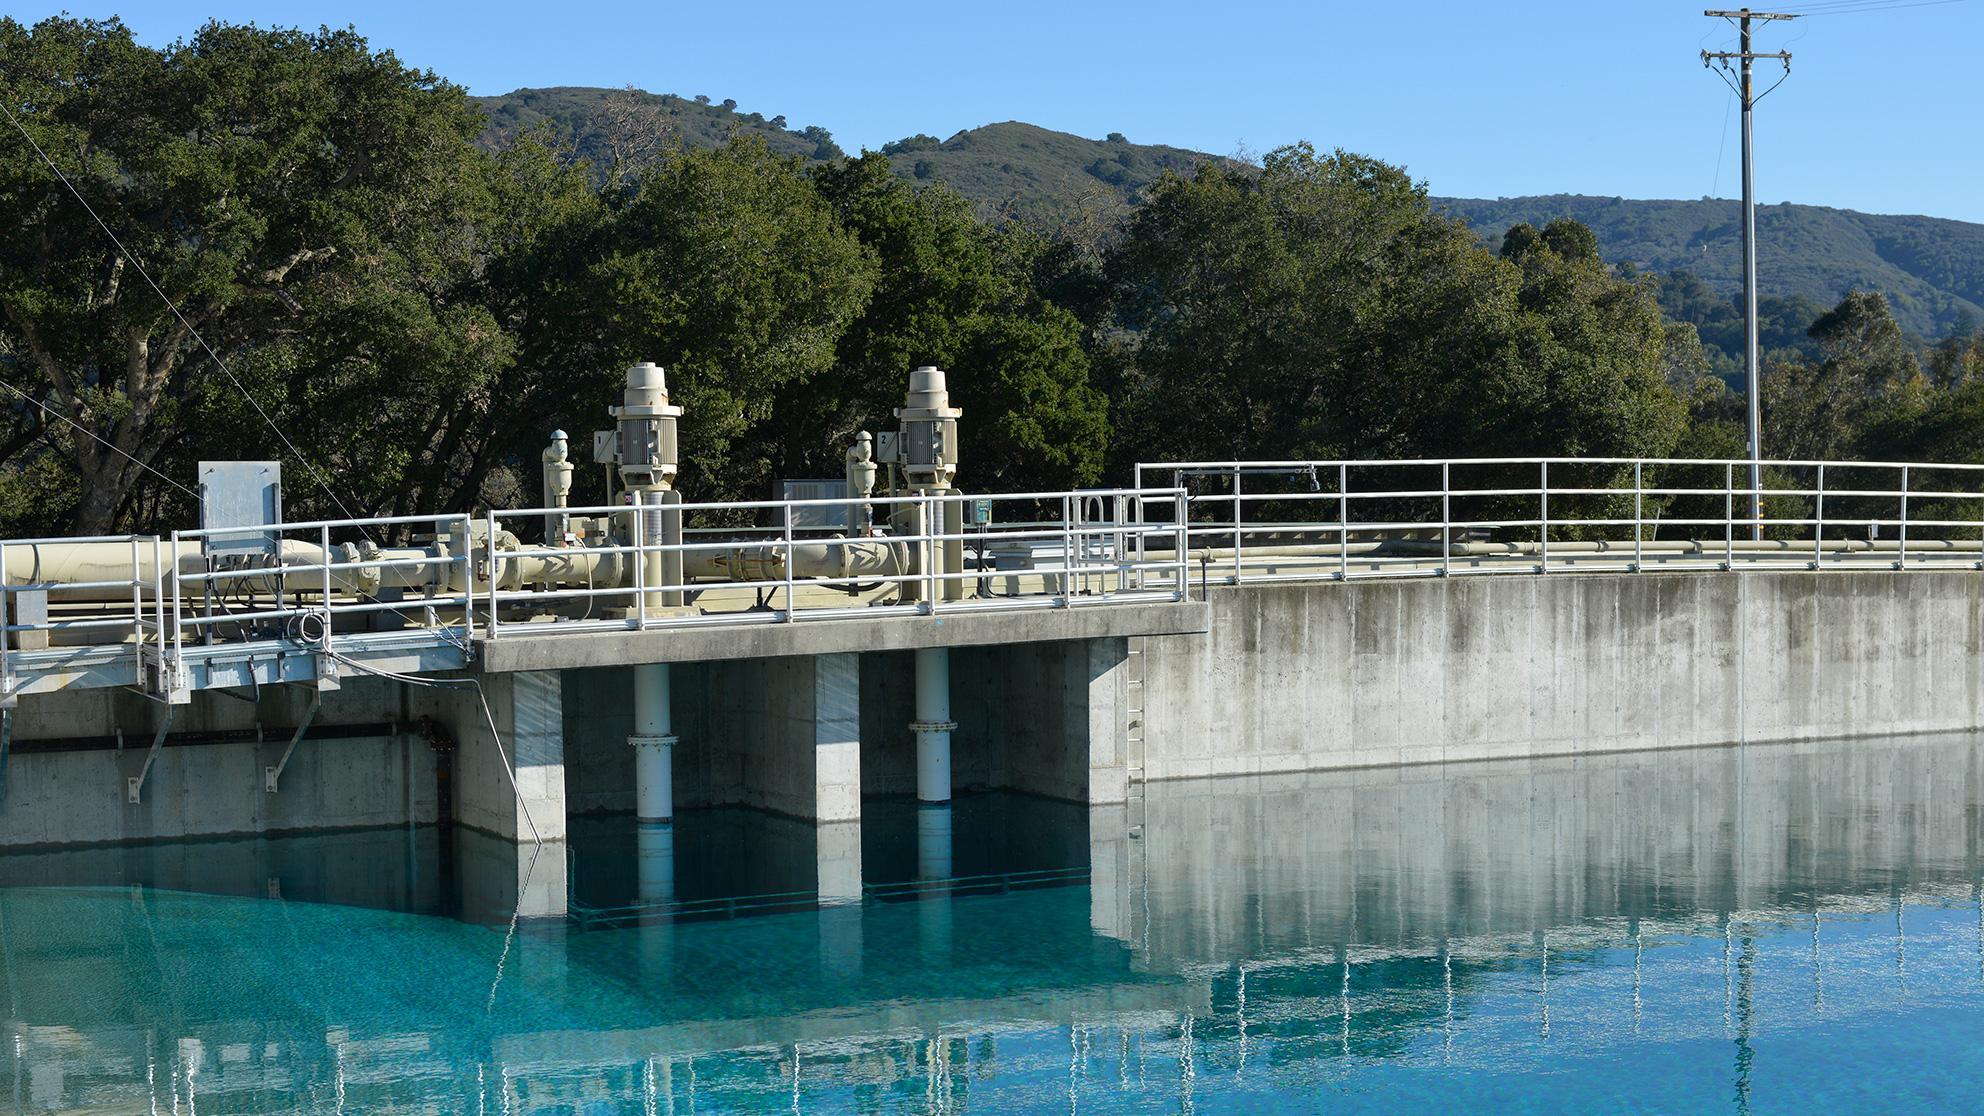 Water reservoir with green hills and blue sky in the background